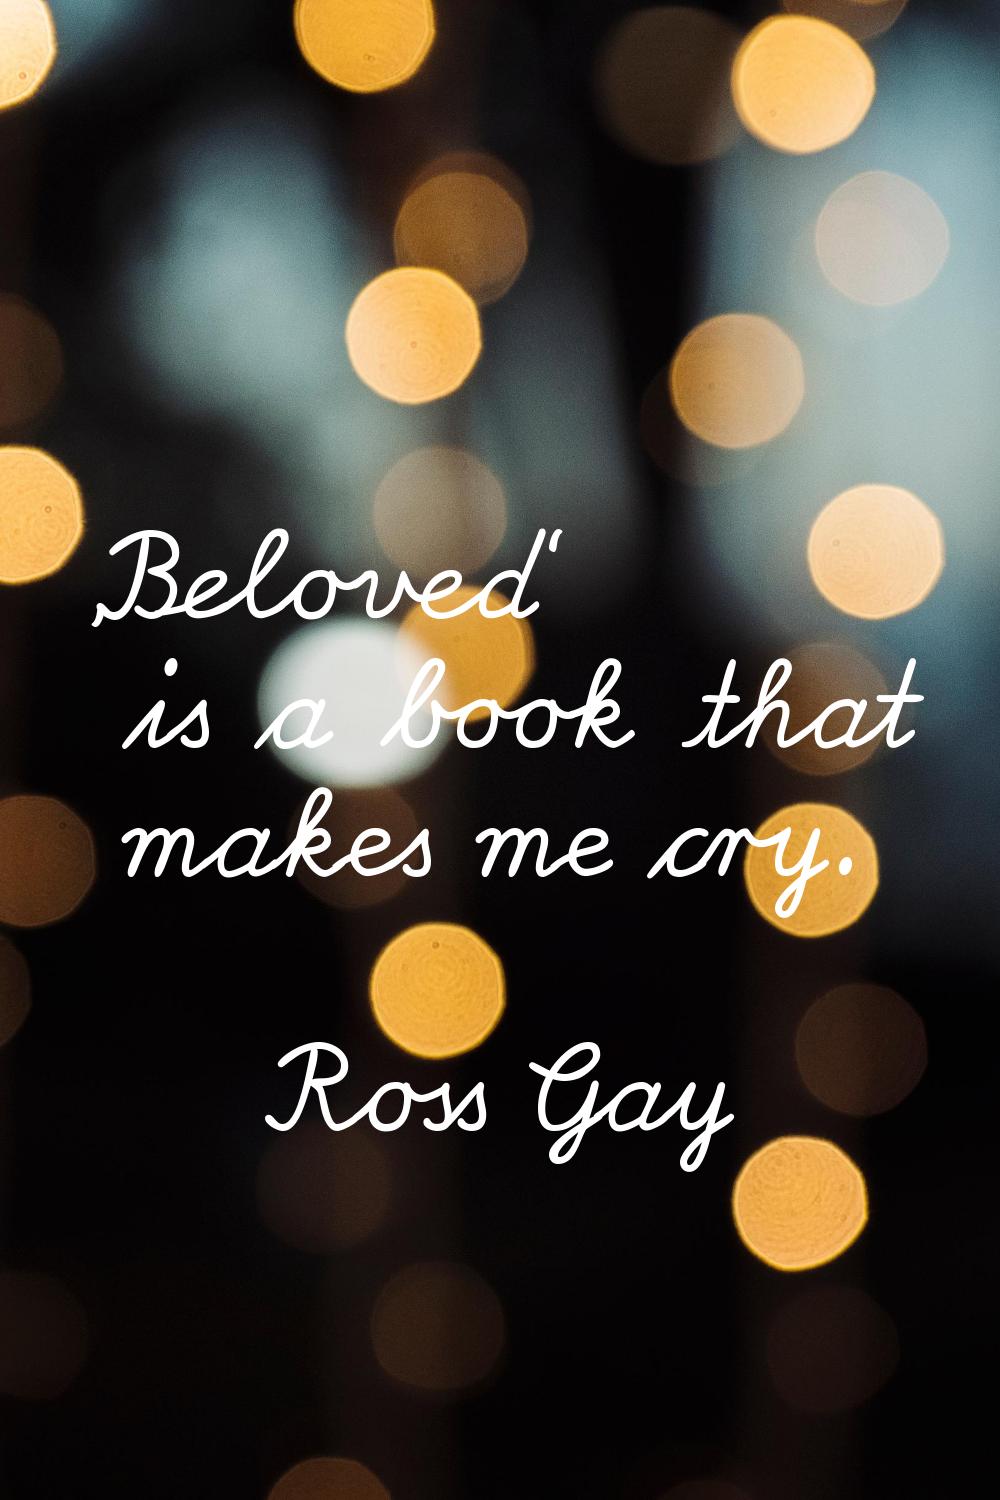 'Beloved' is a book that makes me cry.